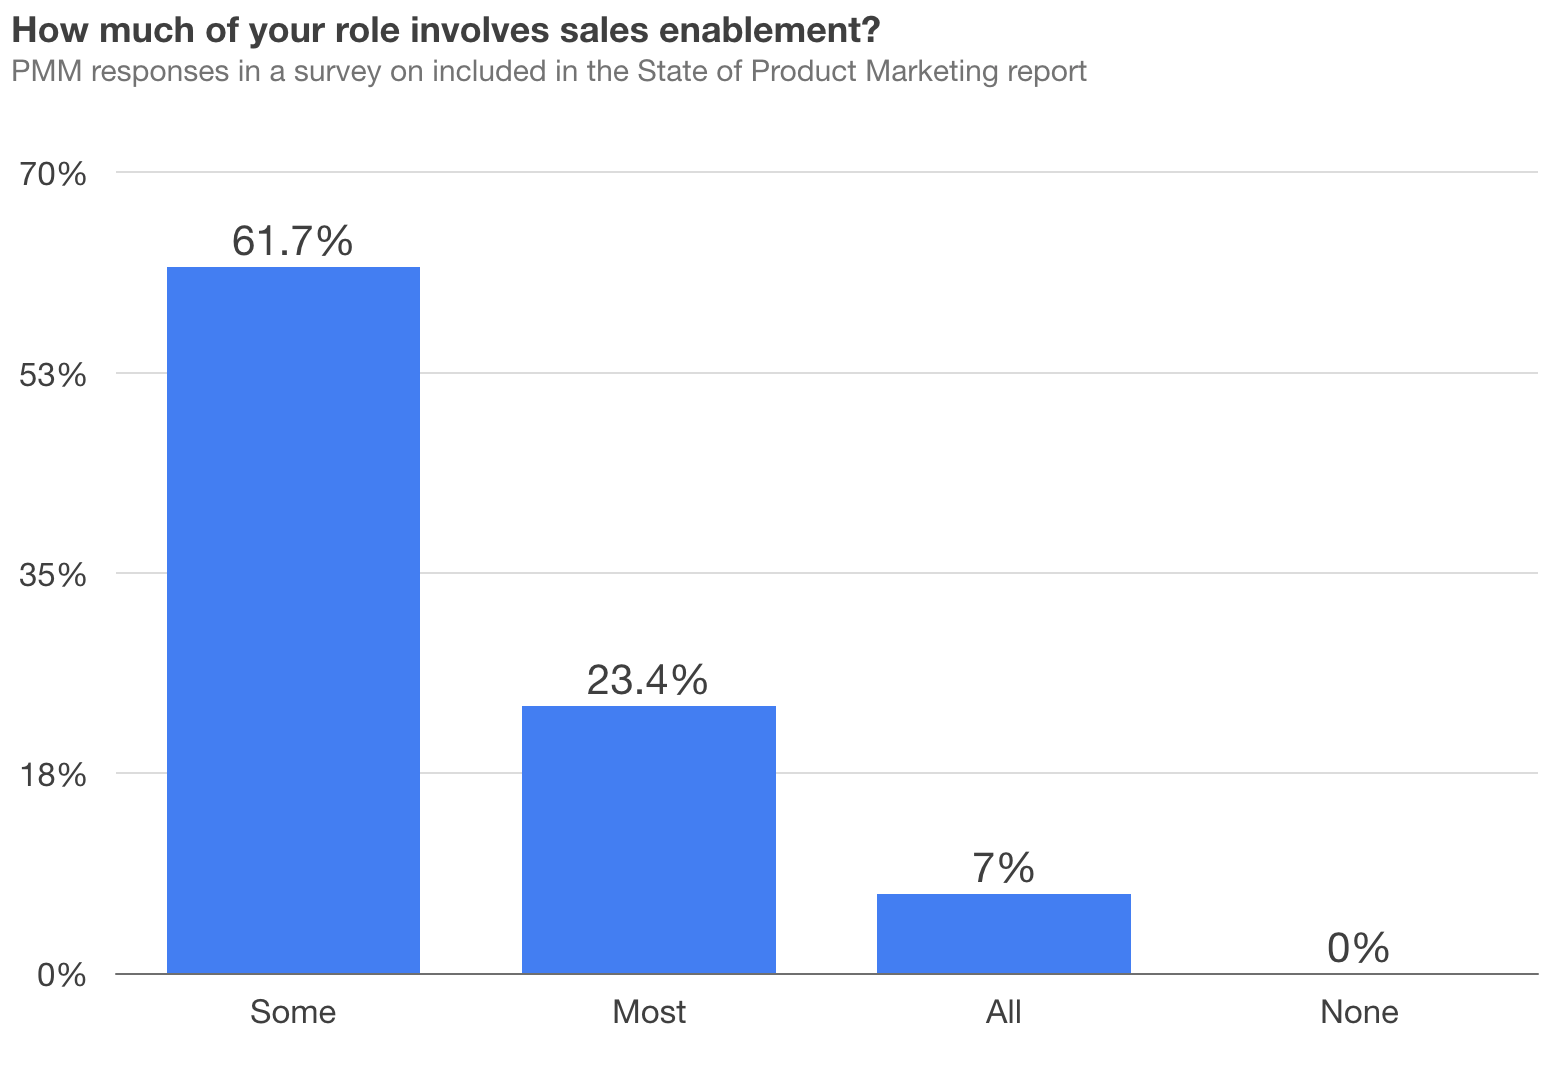 Survey results which show how central sales enablement is to the PMM role